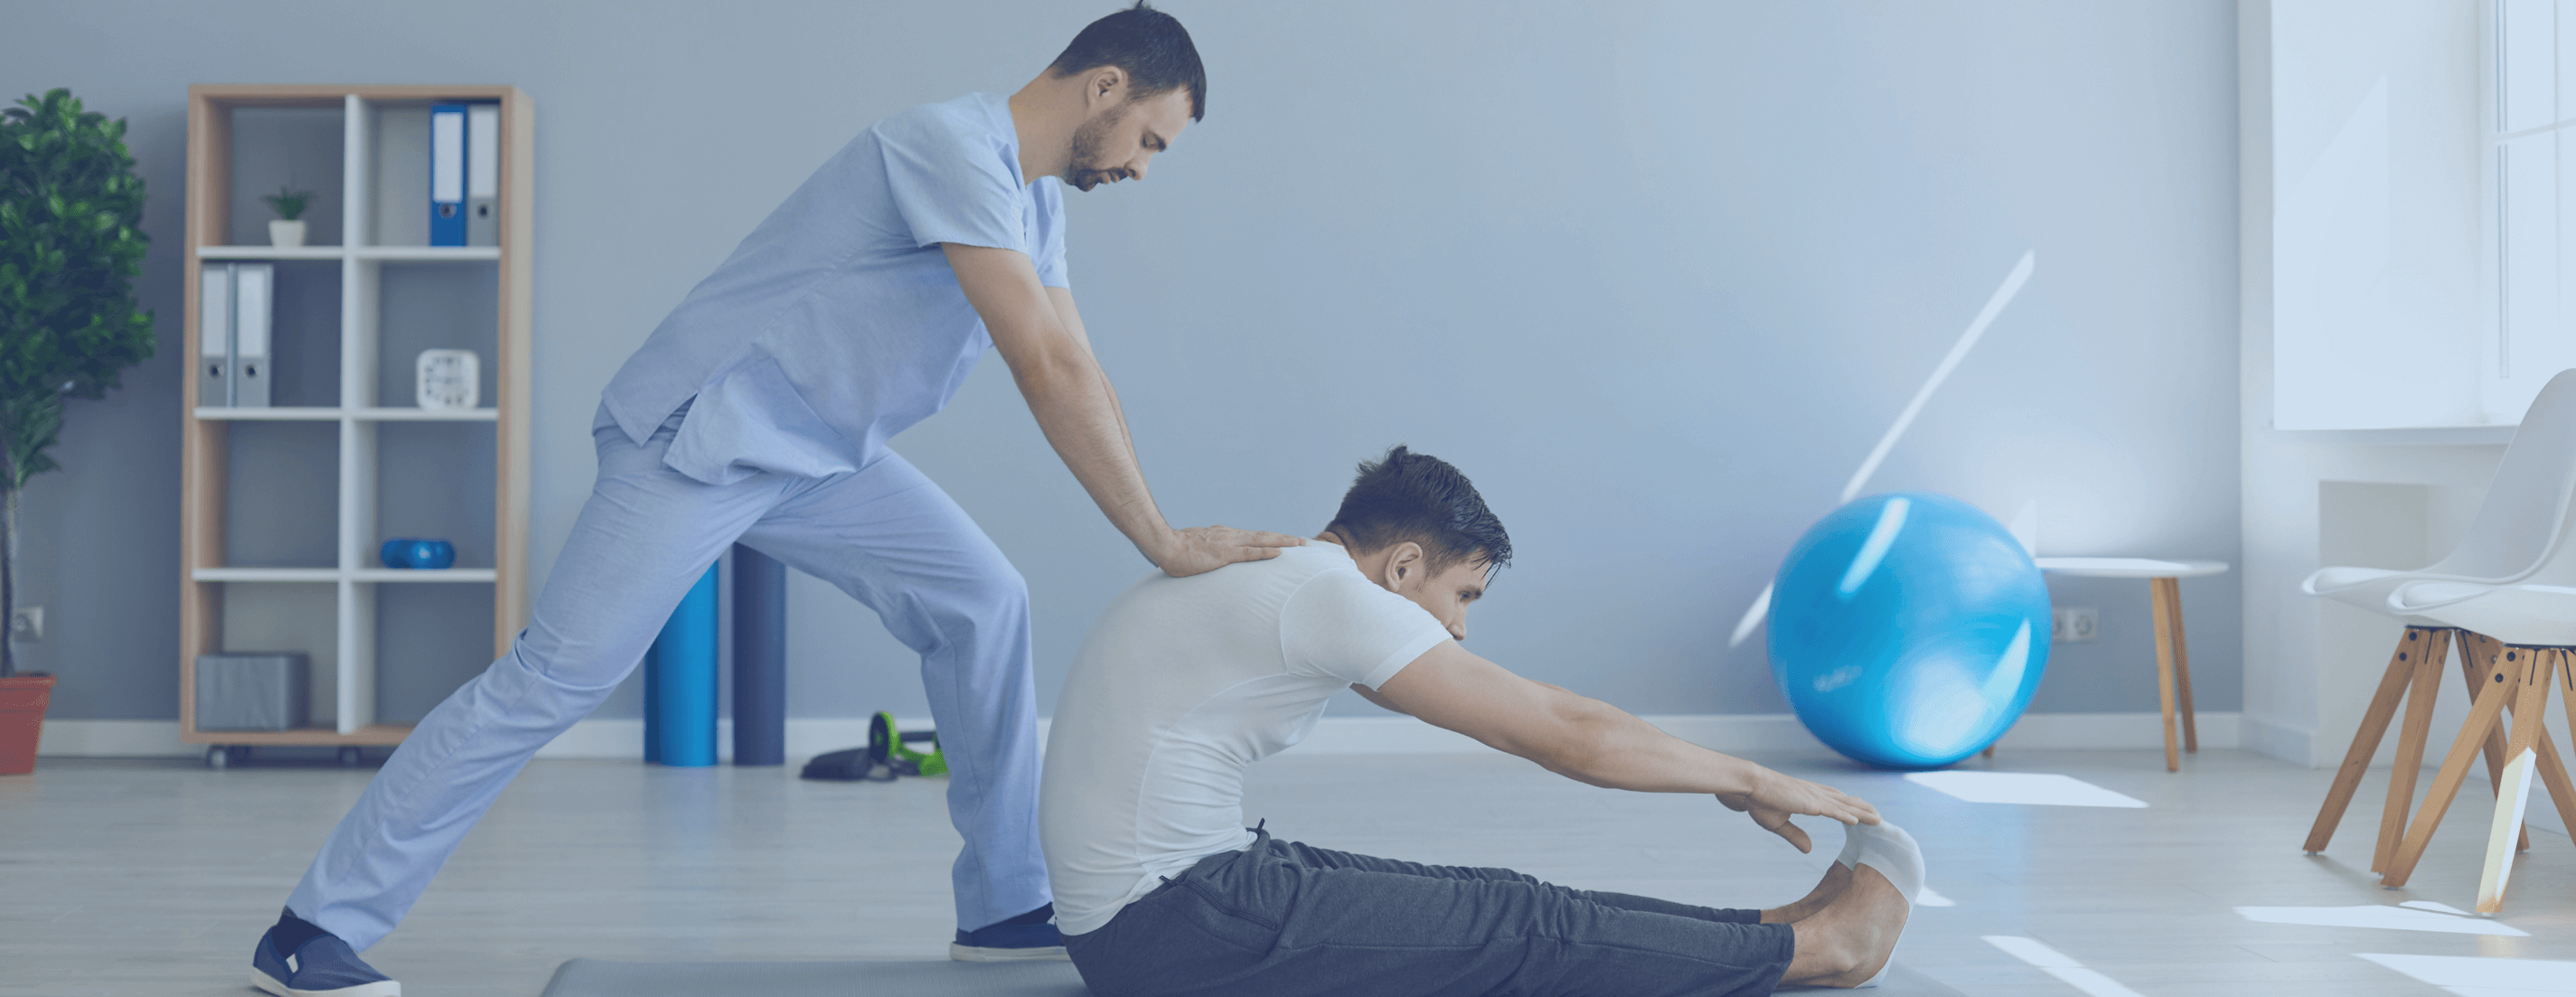 Physiotherapy services in Palm Jumeirah Dubai